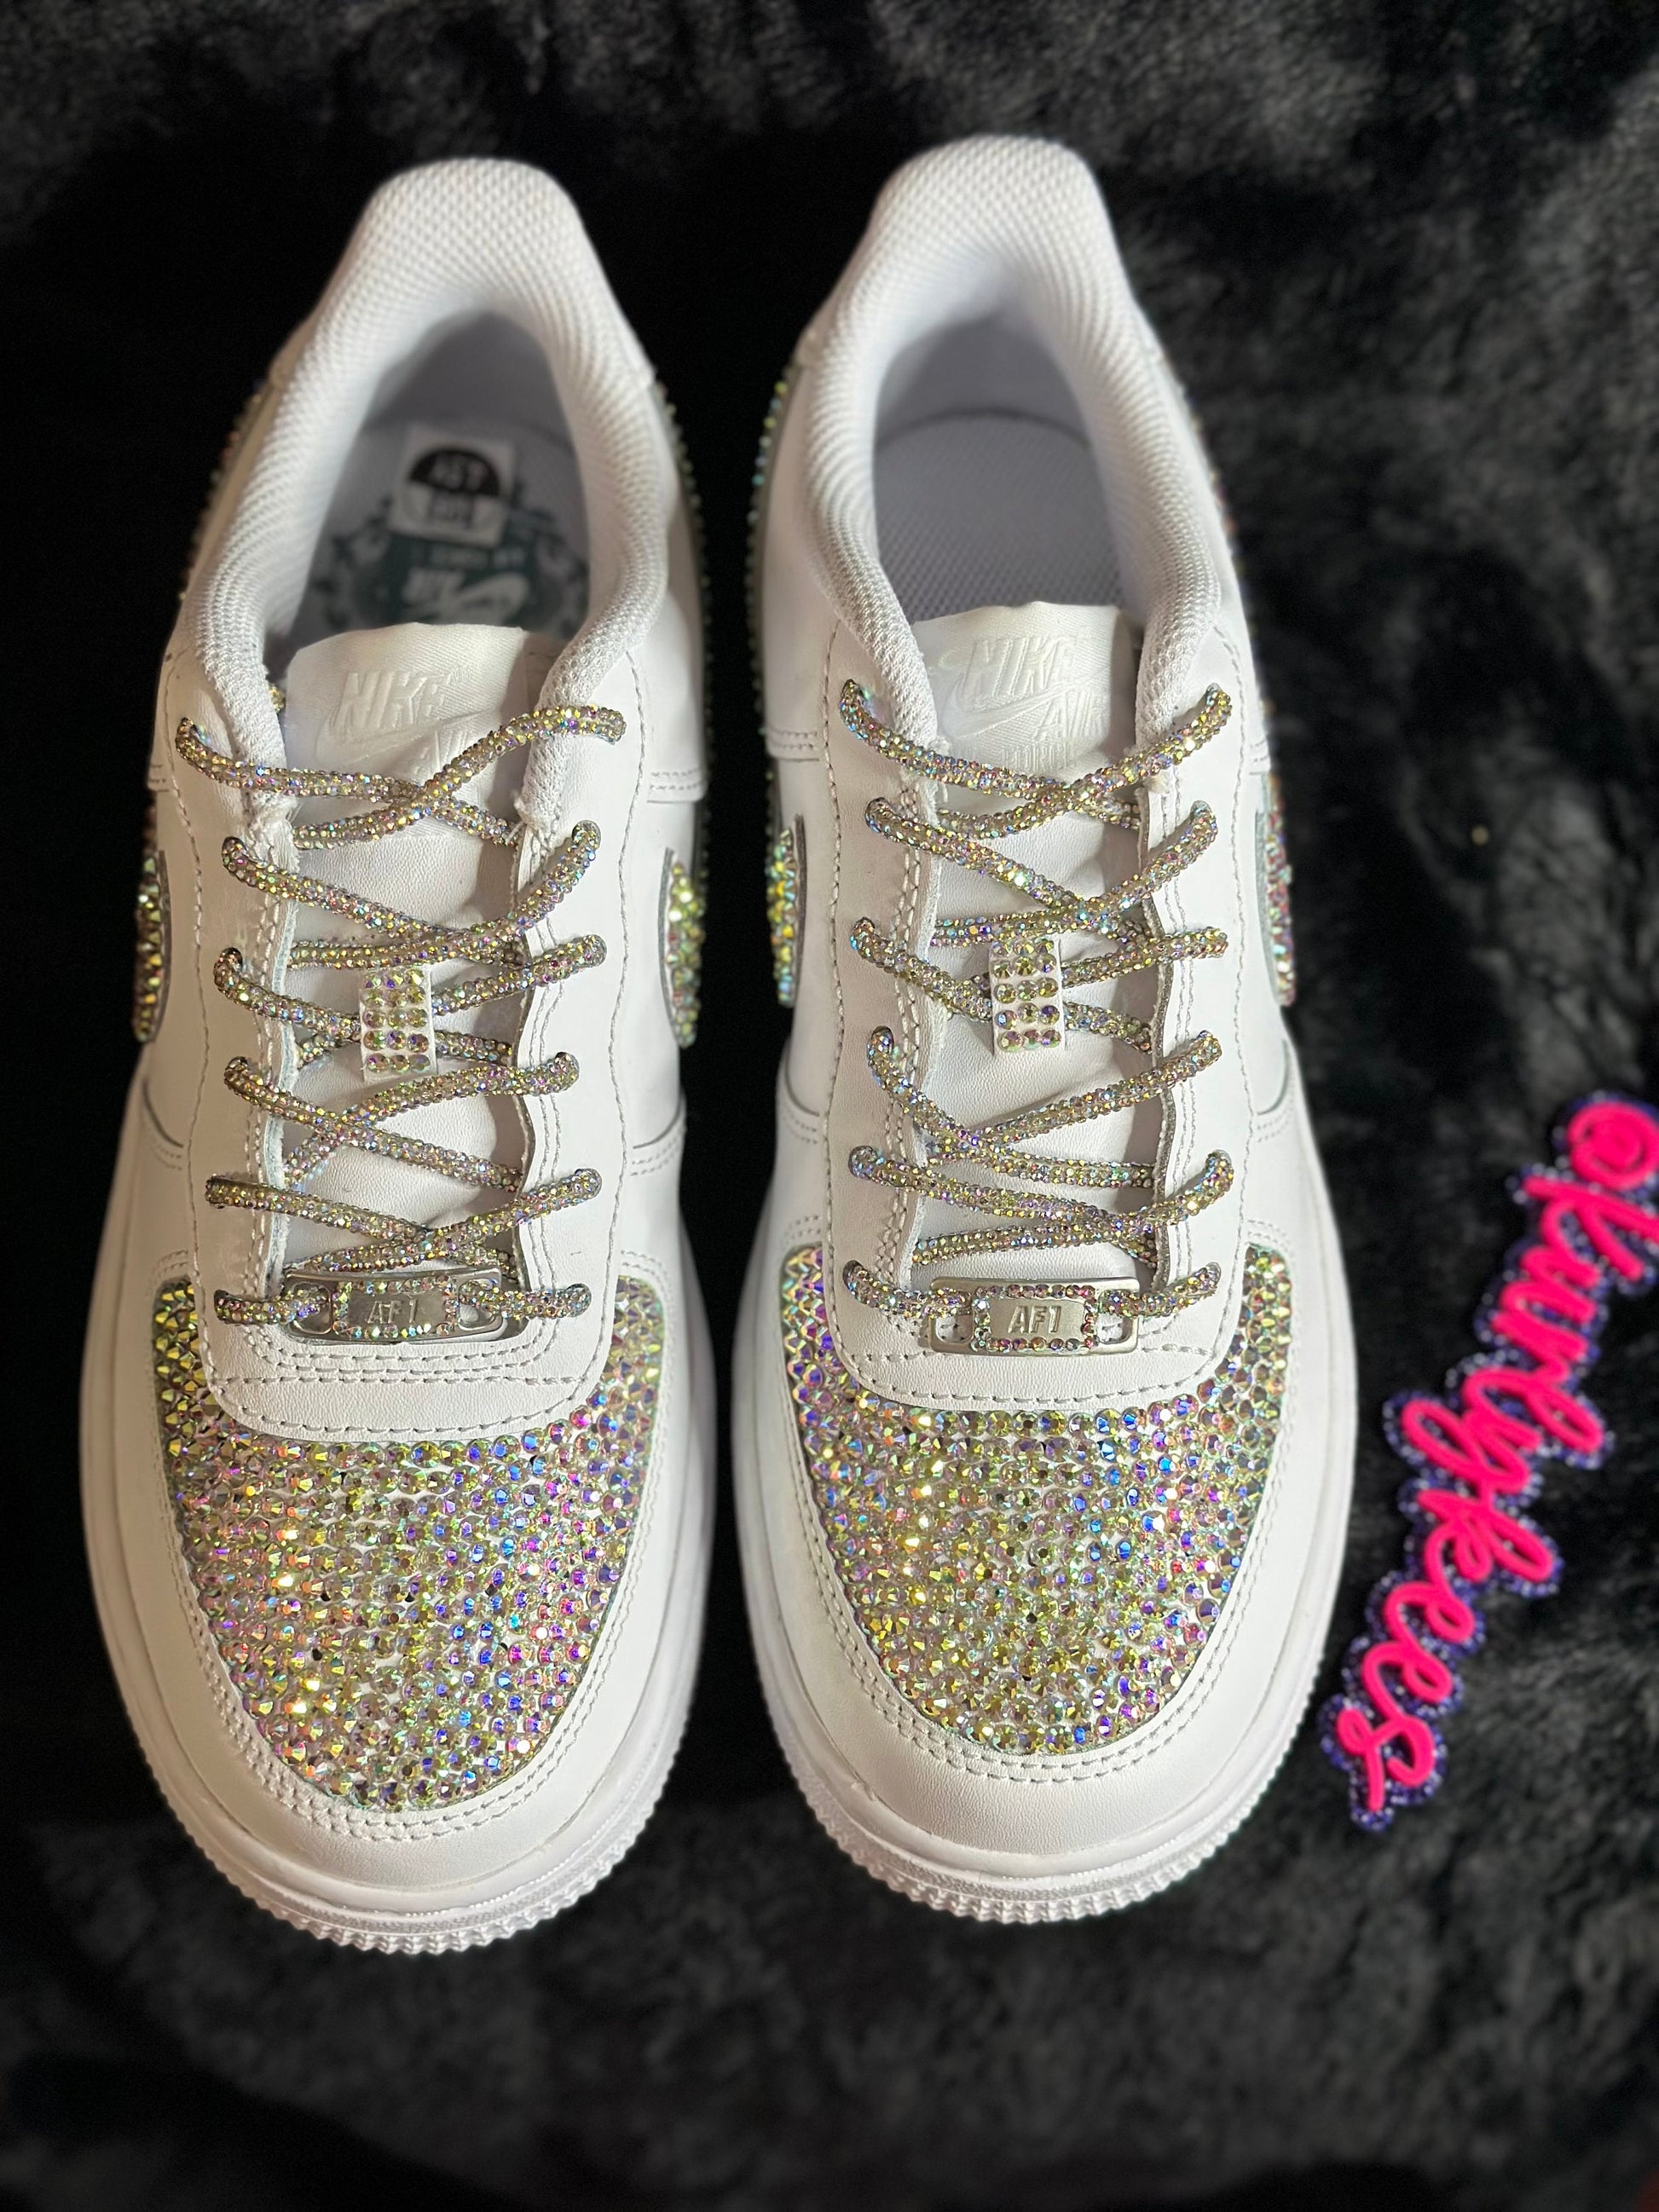 Custom Nike Air Force Ones/ Nike Swoosh and Toe Box, Blinged with hand placed Glass or Resin Stones